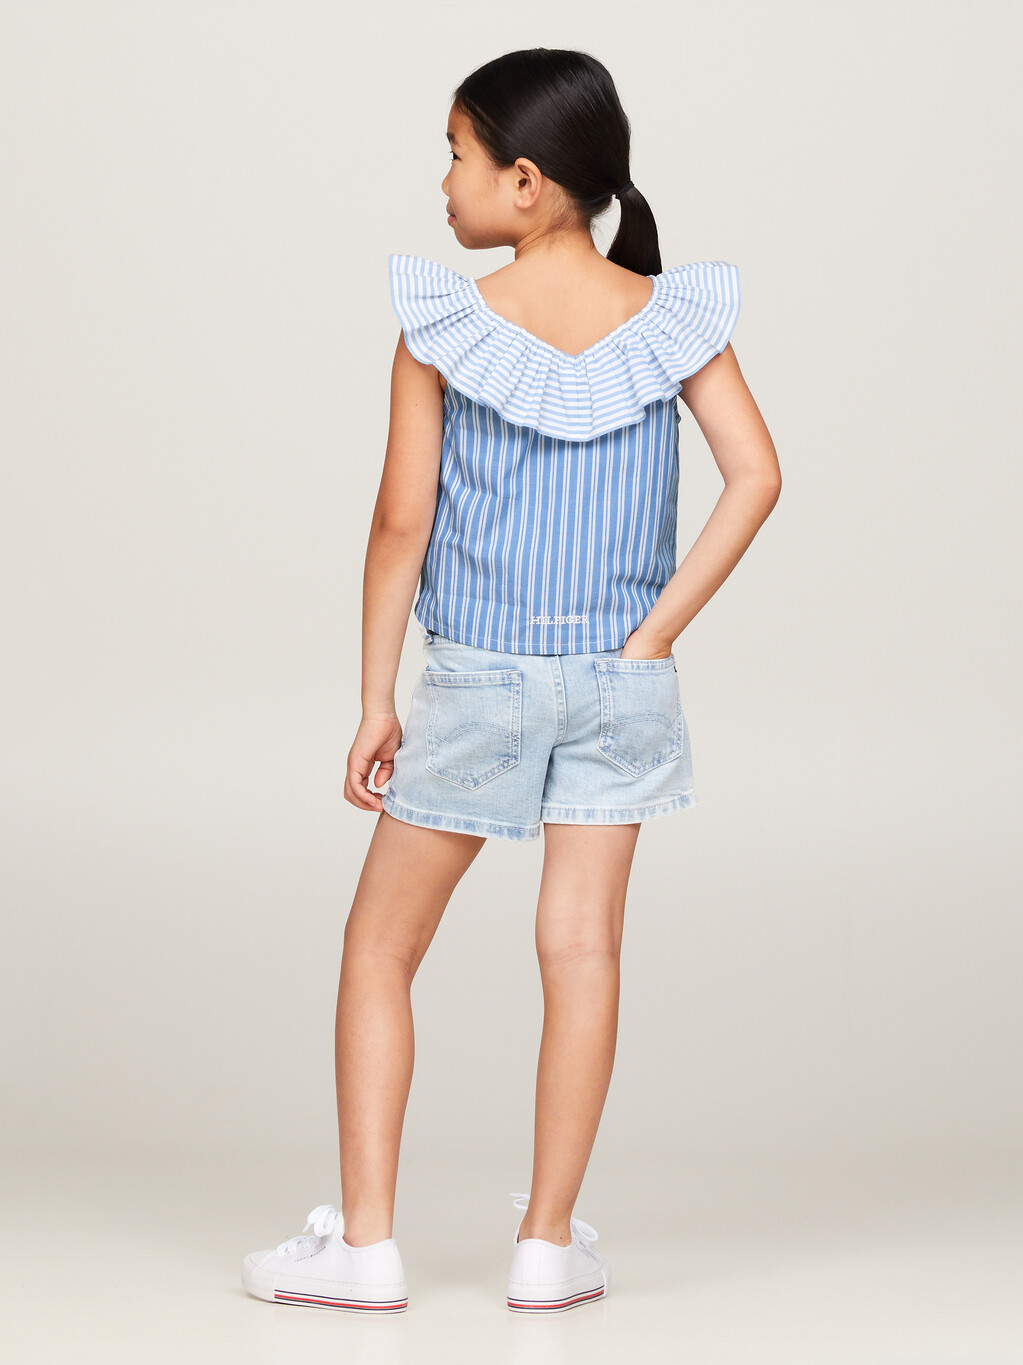 Mixed Stripe Frill Neckline Cropped Top, Blue Spell Stripe / White, hi-res